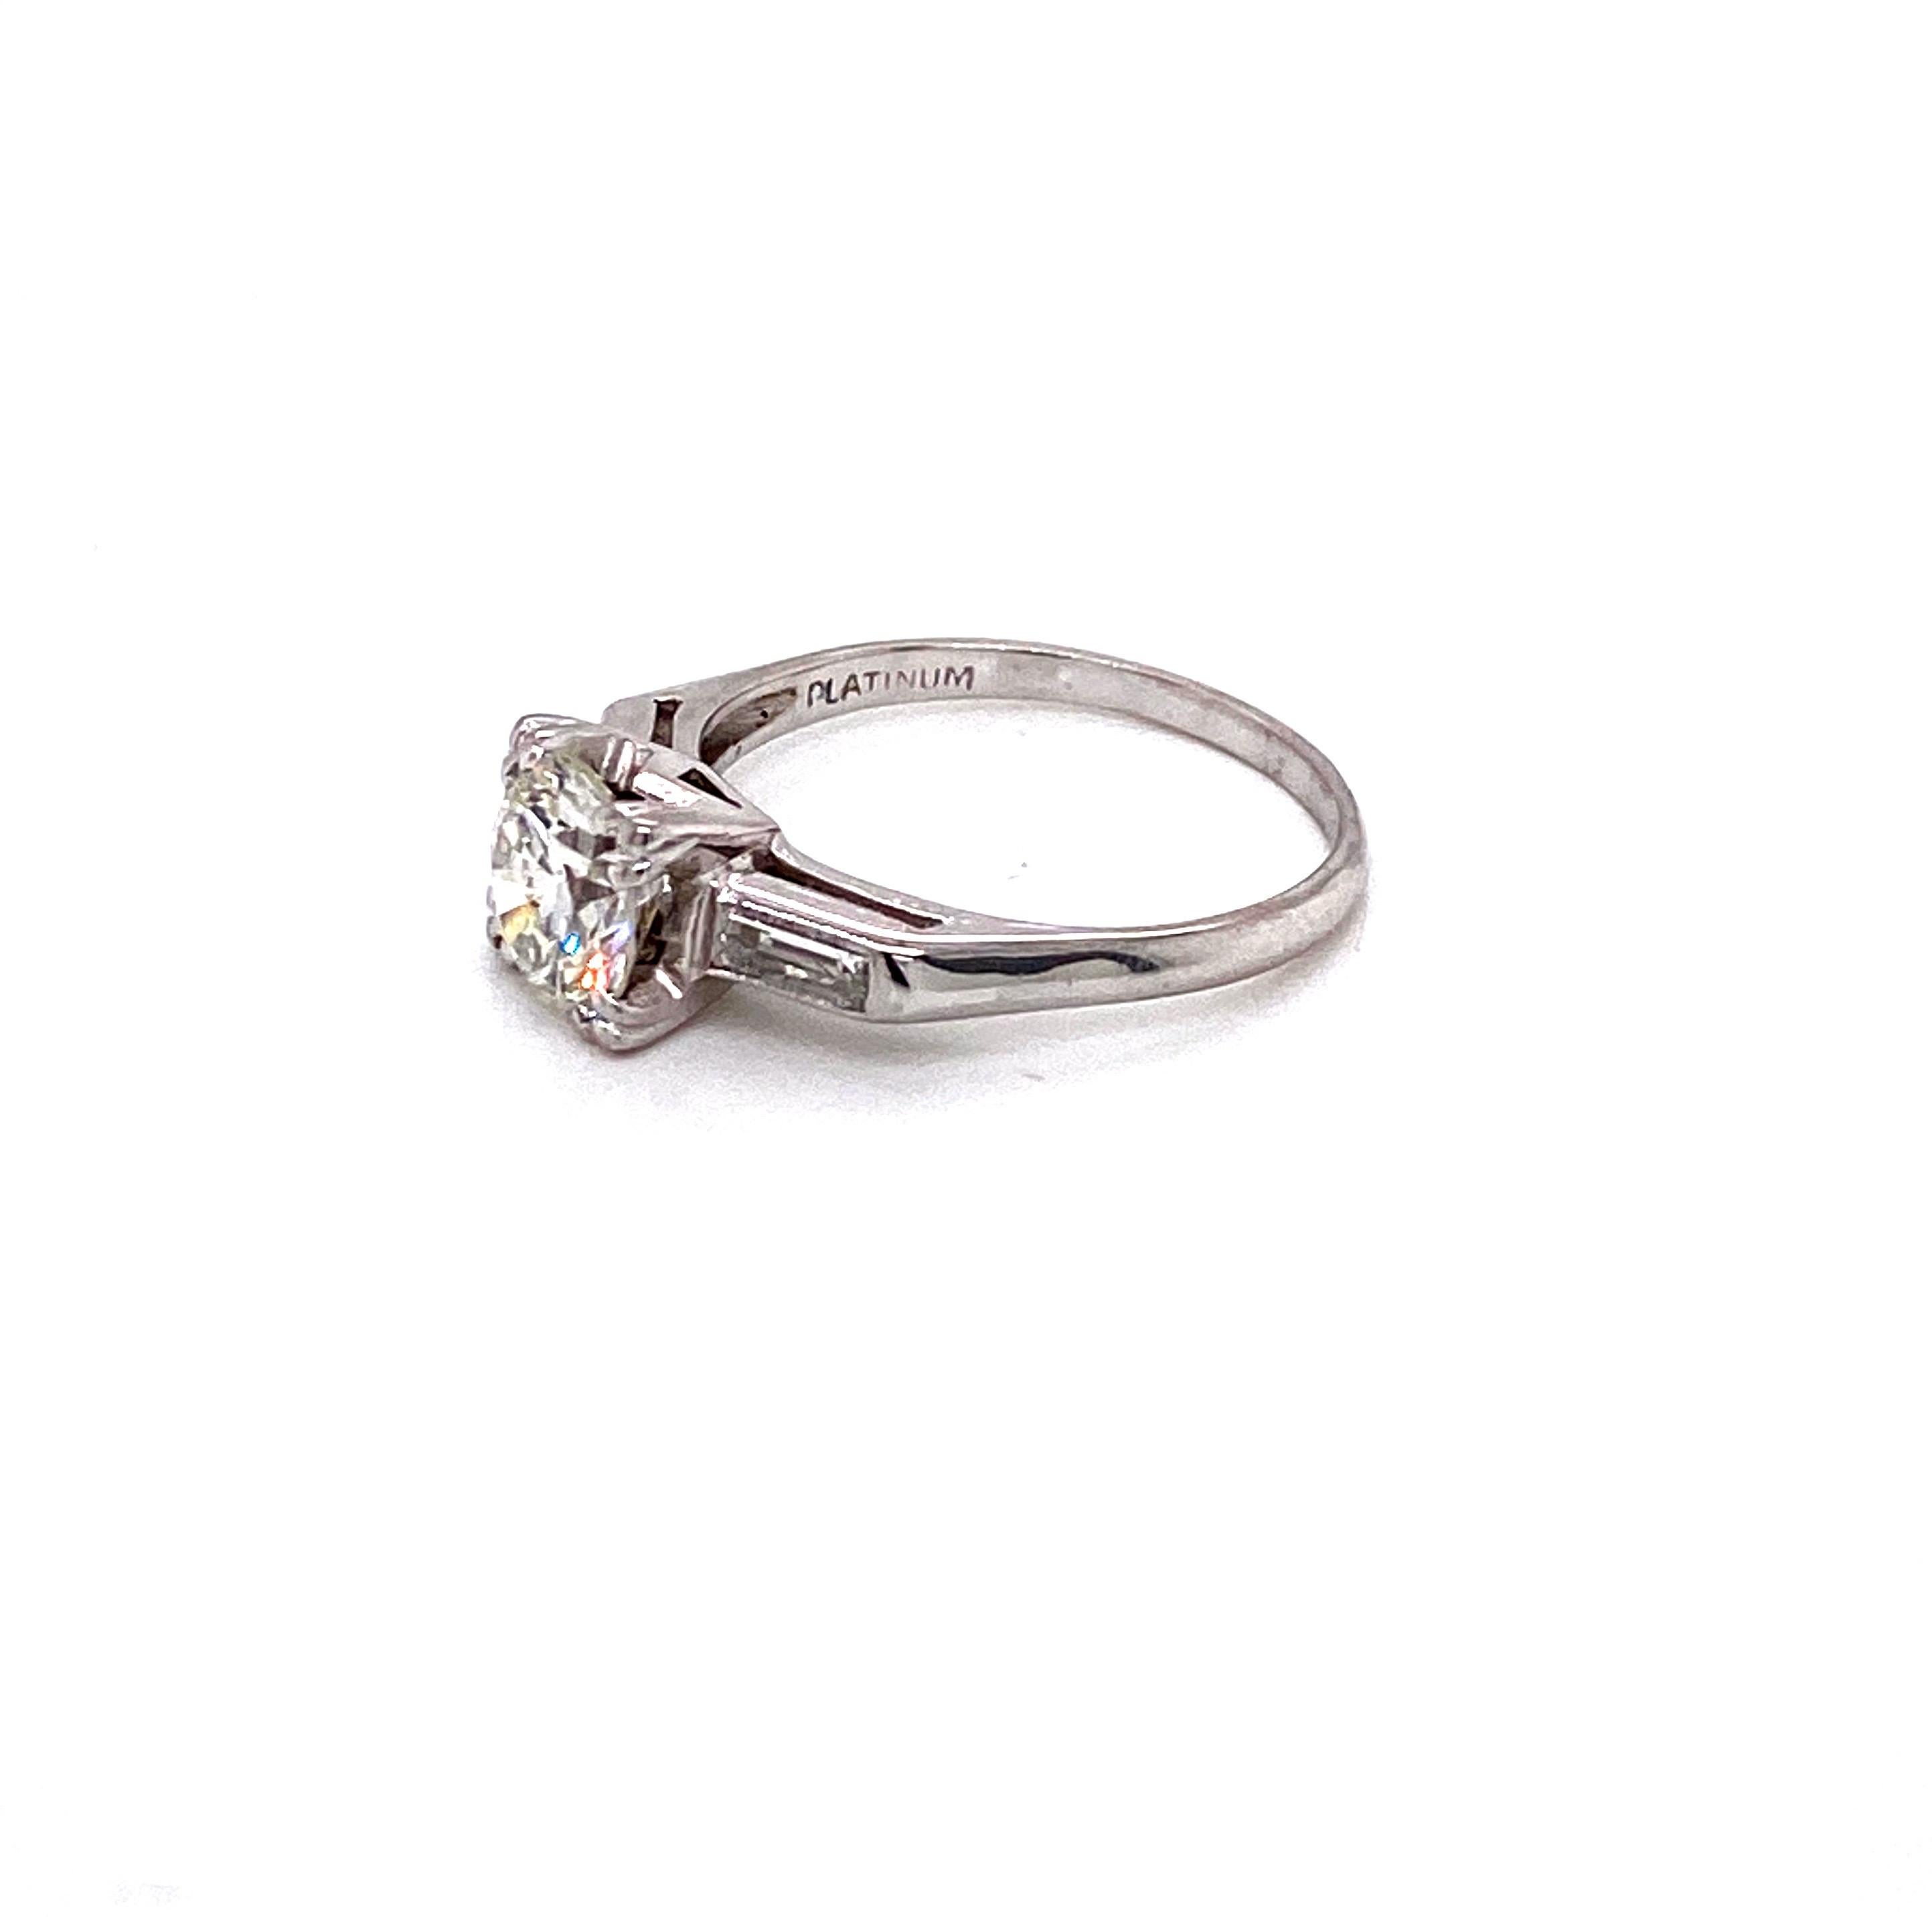 A breathtaking exemplar of mid-20th century elegance, this vintage platinum ring dates back to the iconic 1950s. The showstopping centerpiece is a gorgeous round transitional cut diamond weighing approximately 1.15 carats. Glowing with a warm J